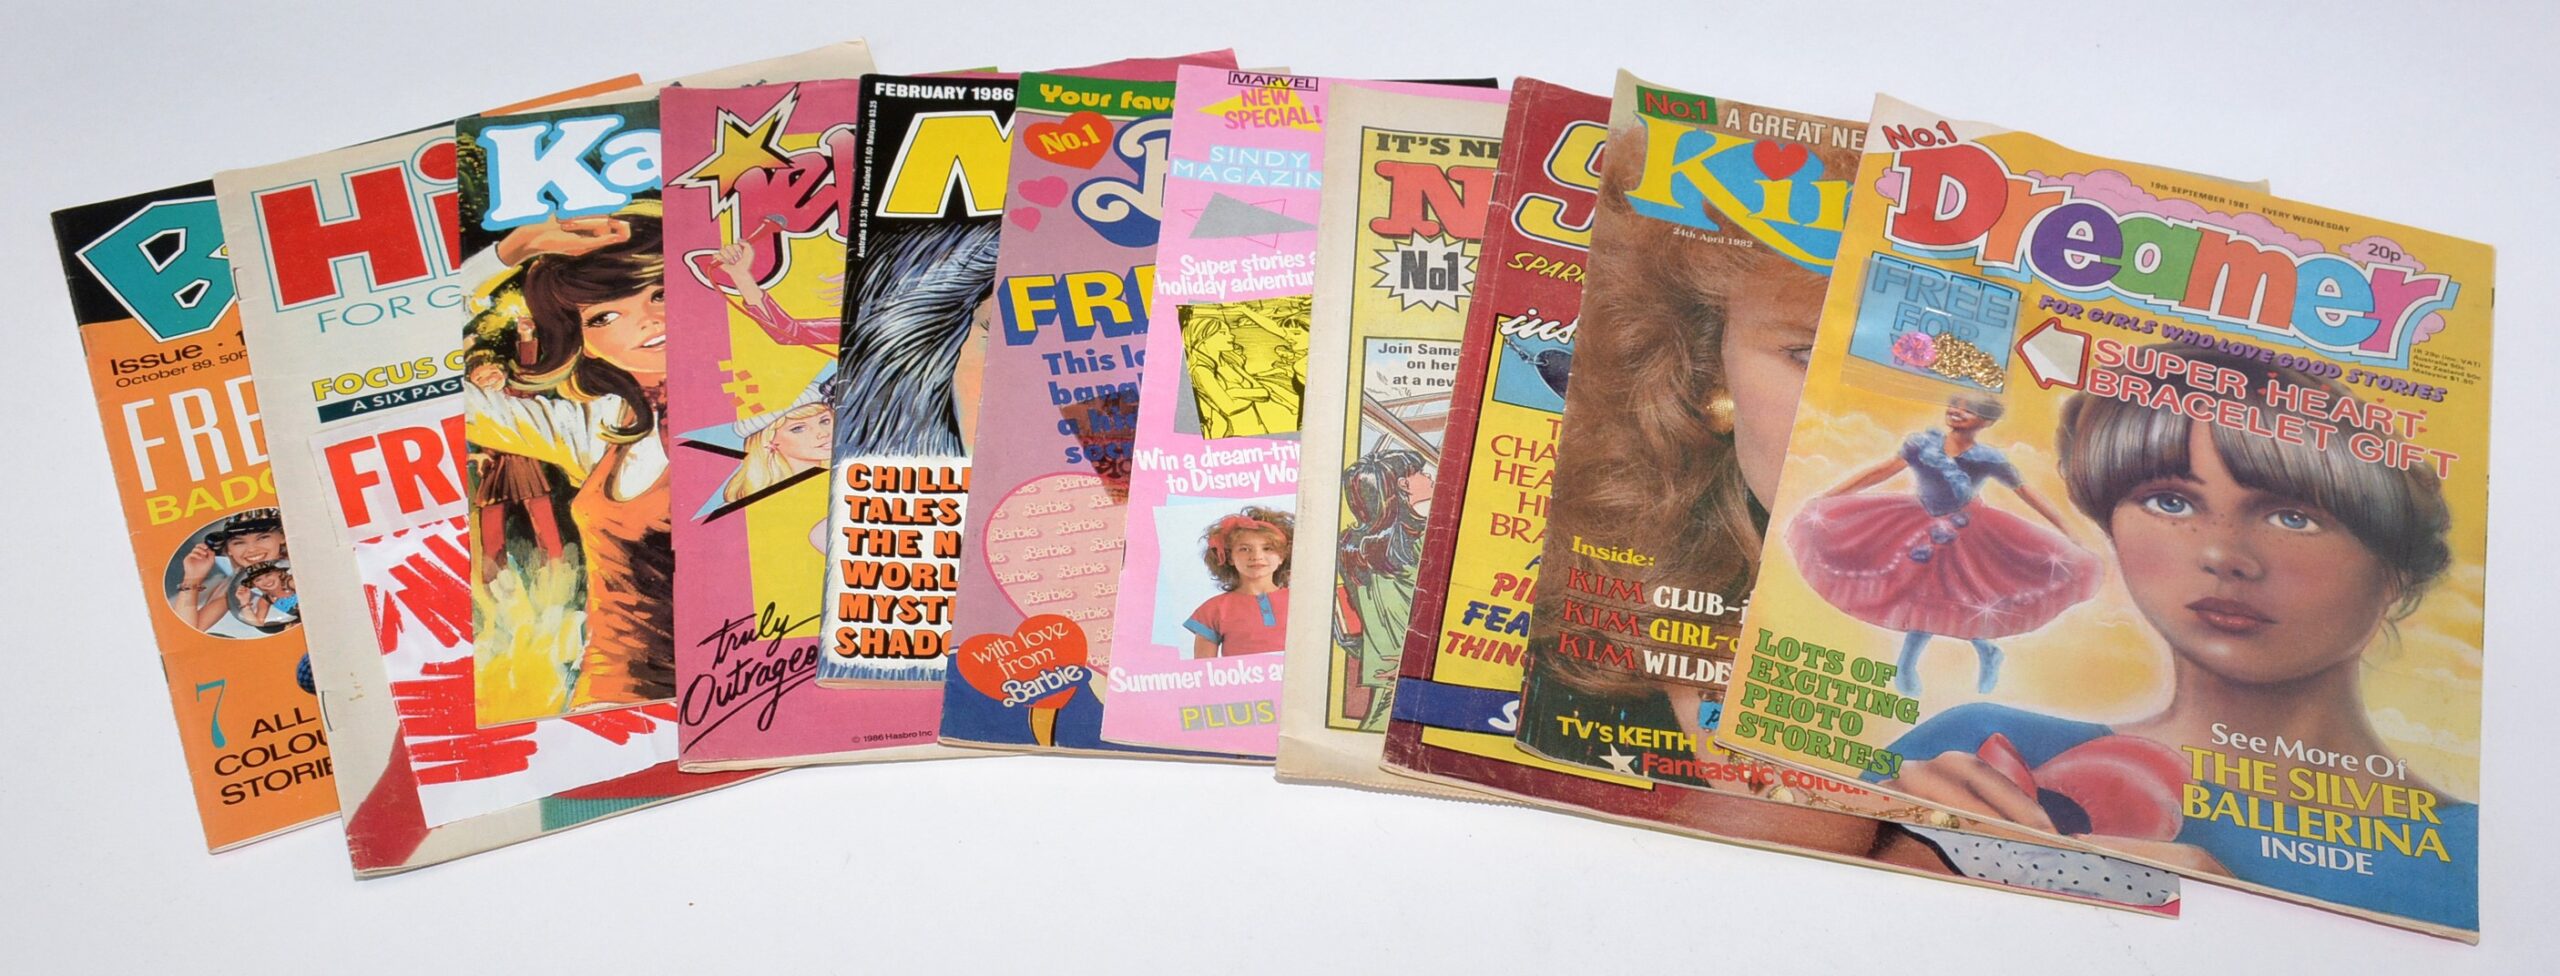 First issues of various British Girls magazines and comics, including Marvel UK's Bea, Dreamer, Kim and more